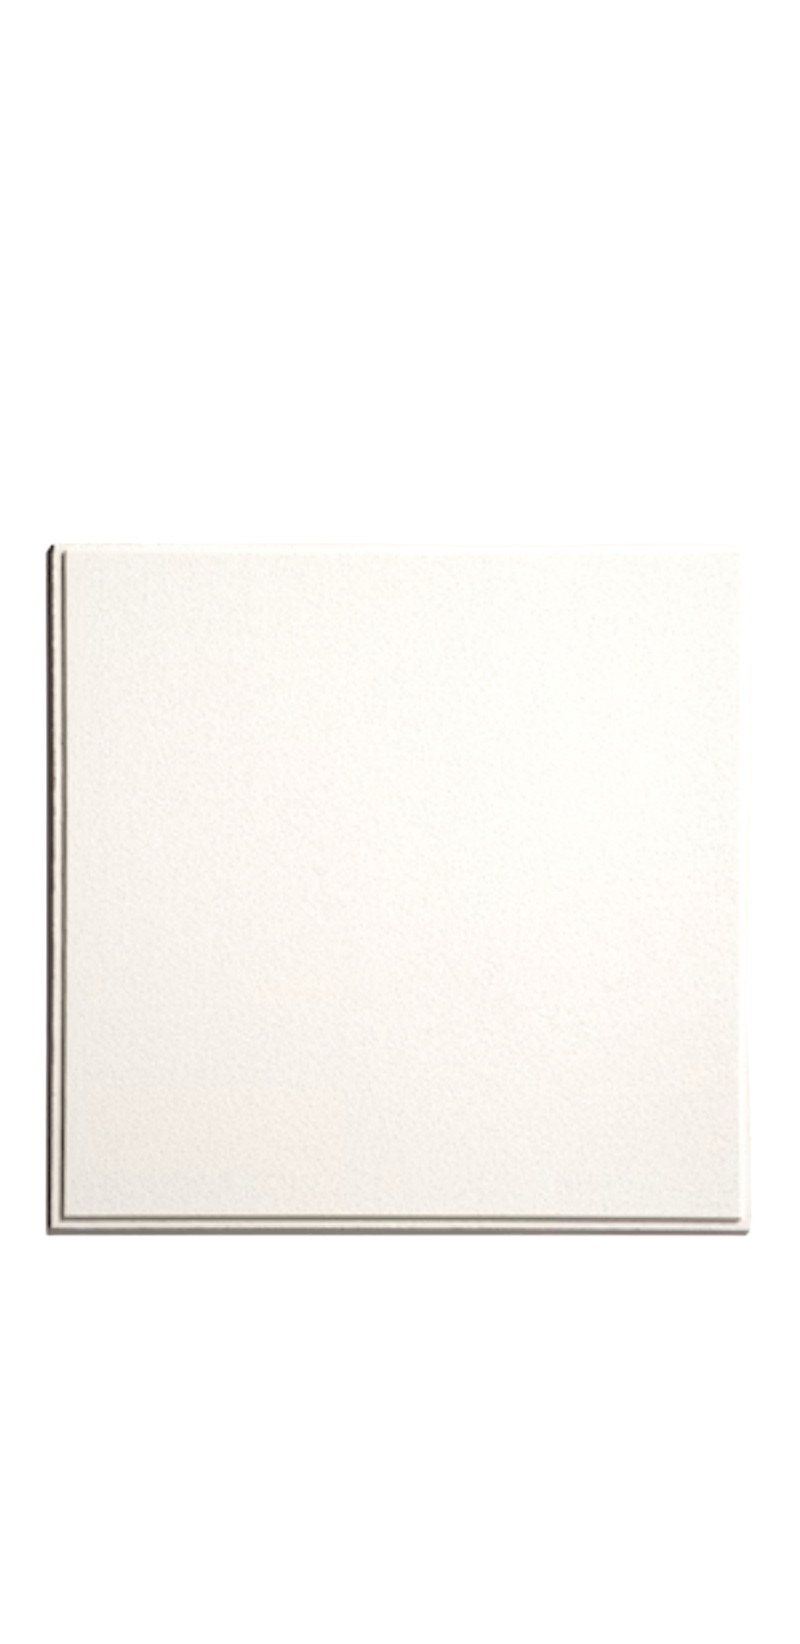 USG 2ft x 2ft Majestic Lay Ceiling Tile